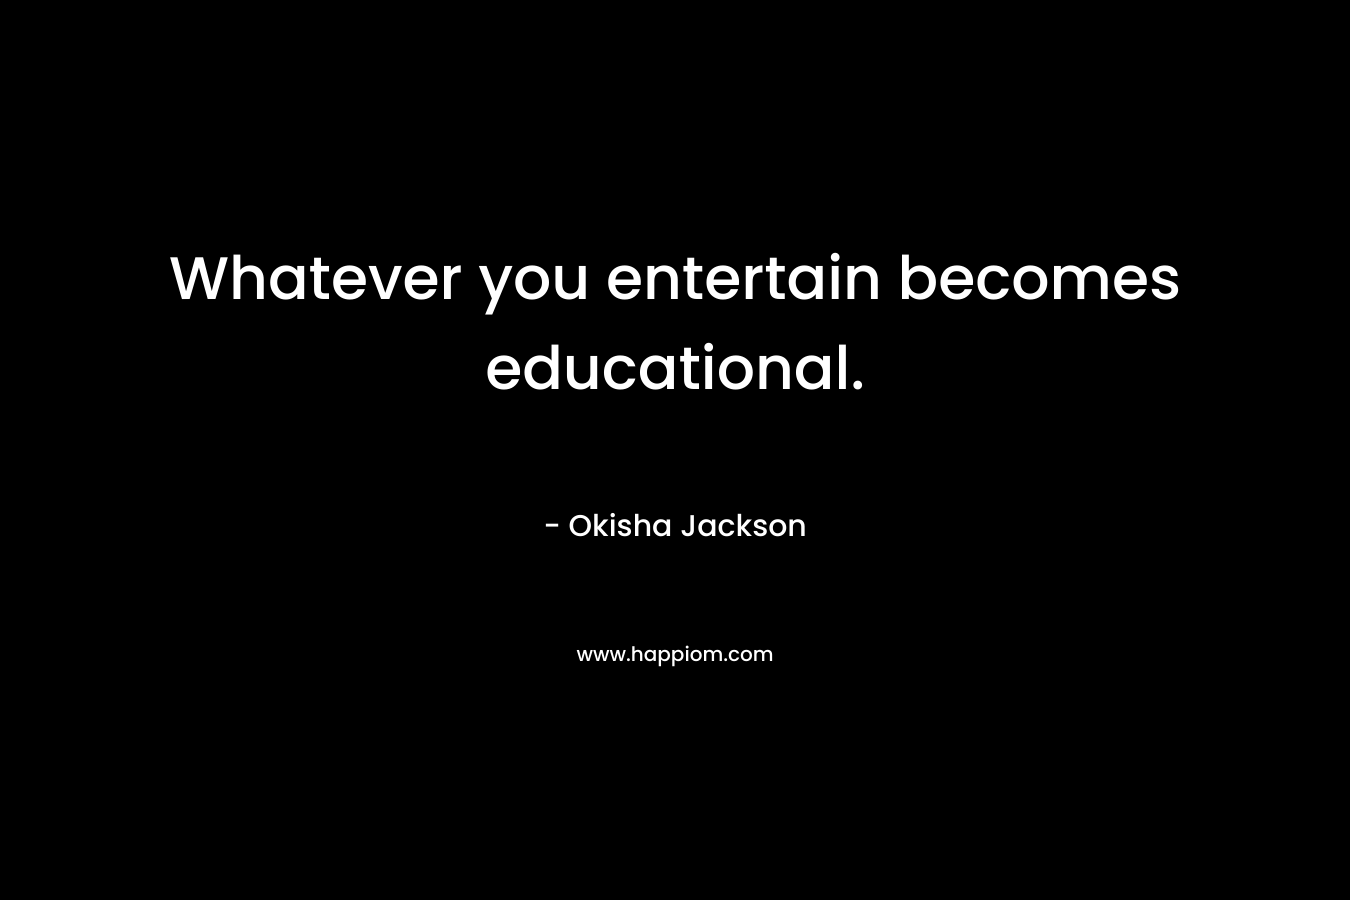 Whatever you entertain becomes educational.